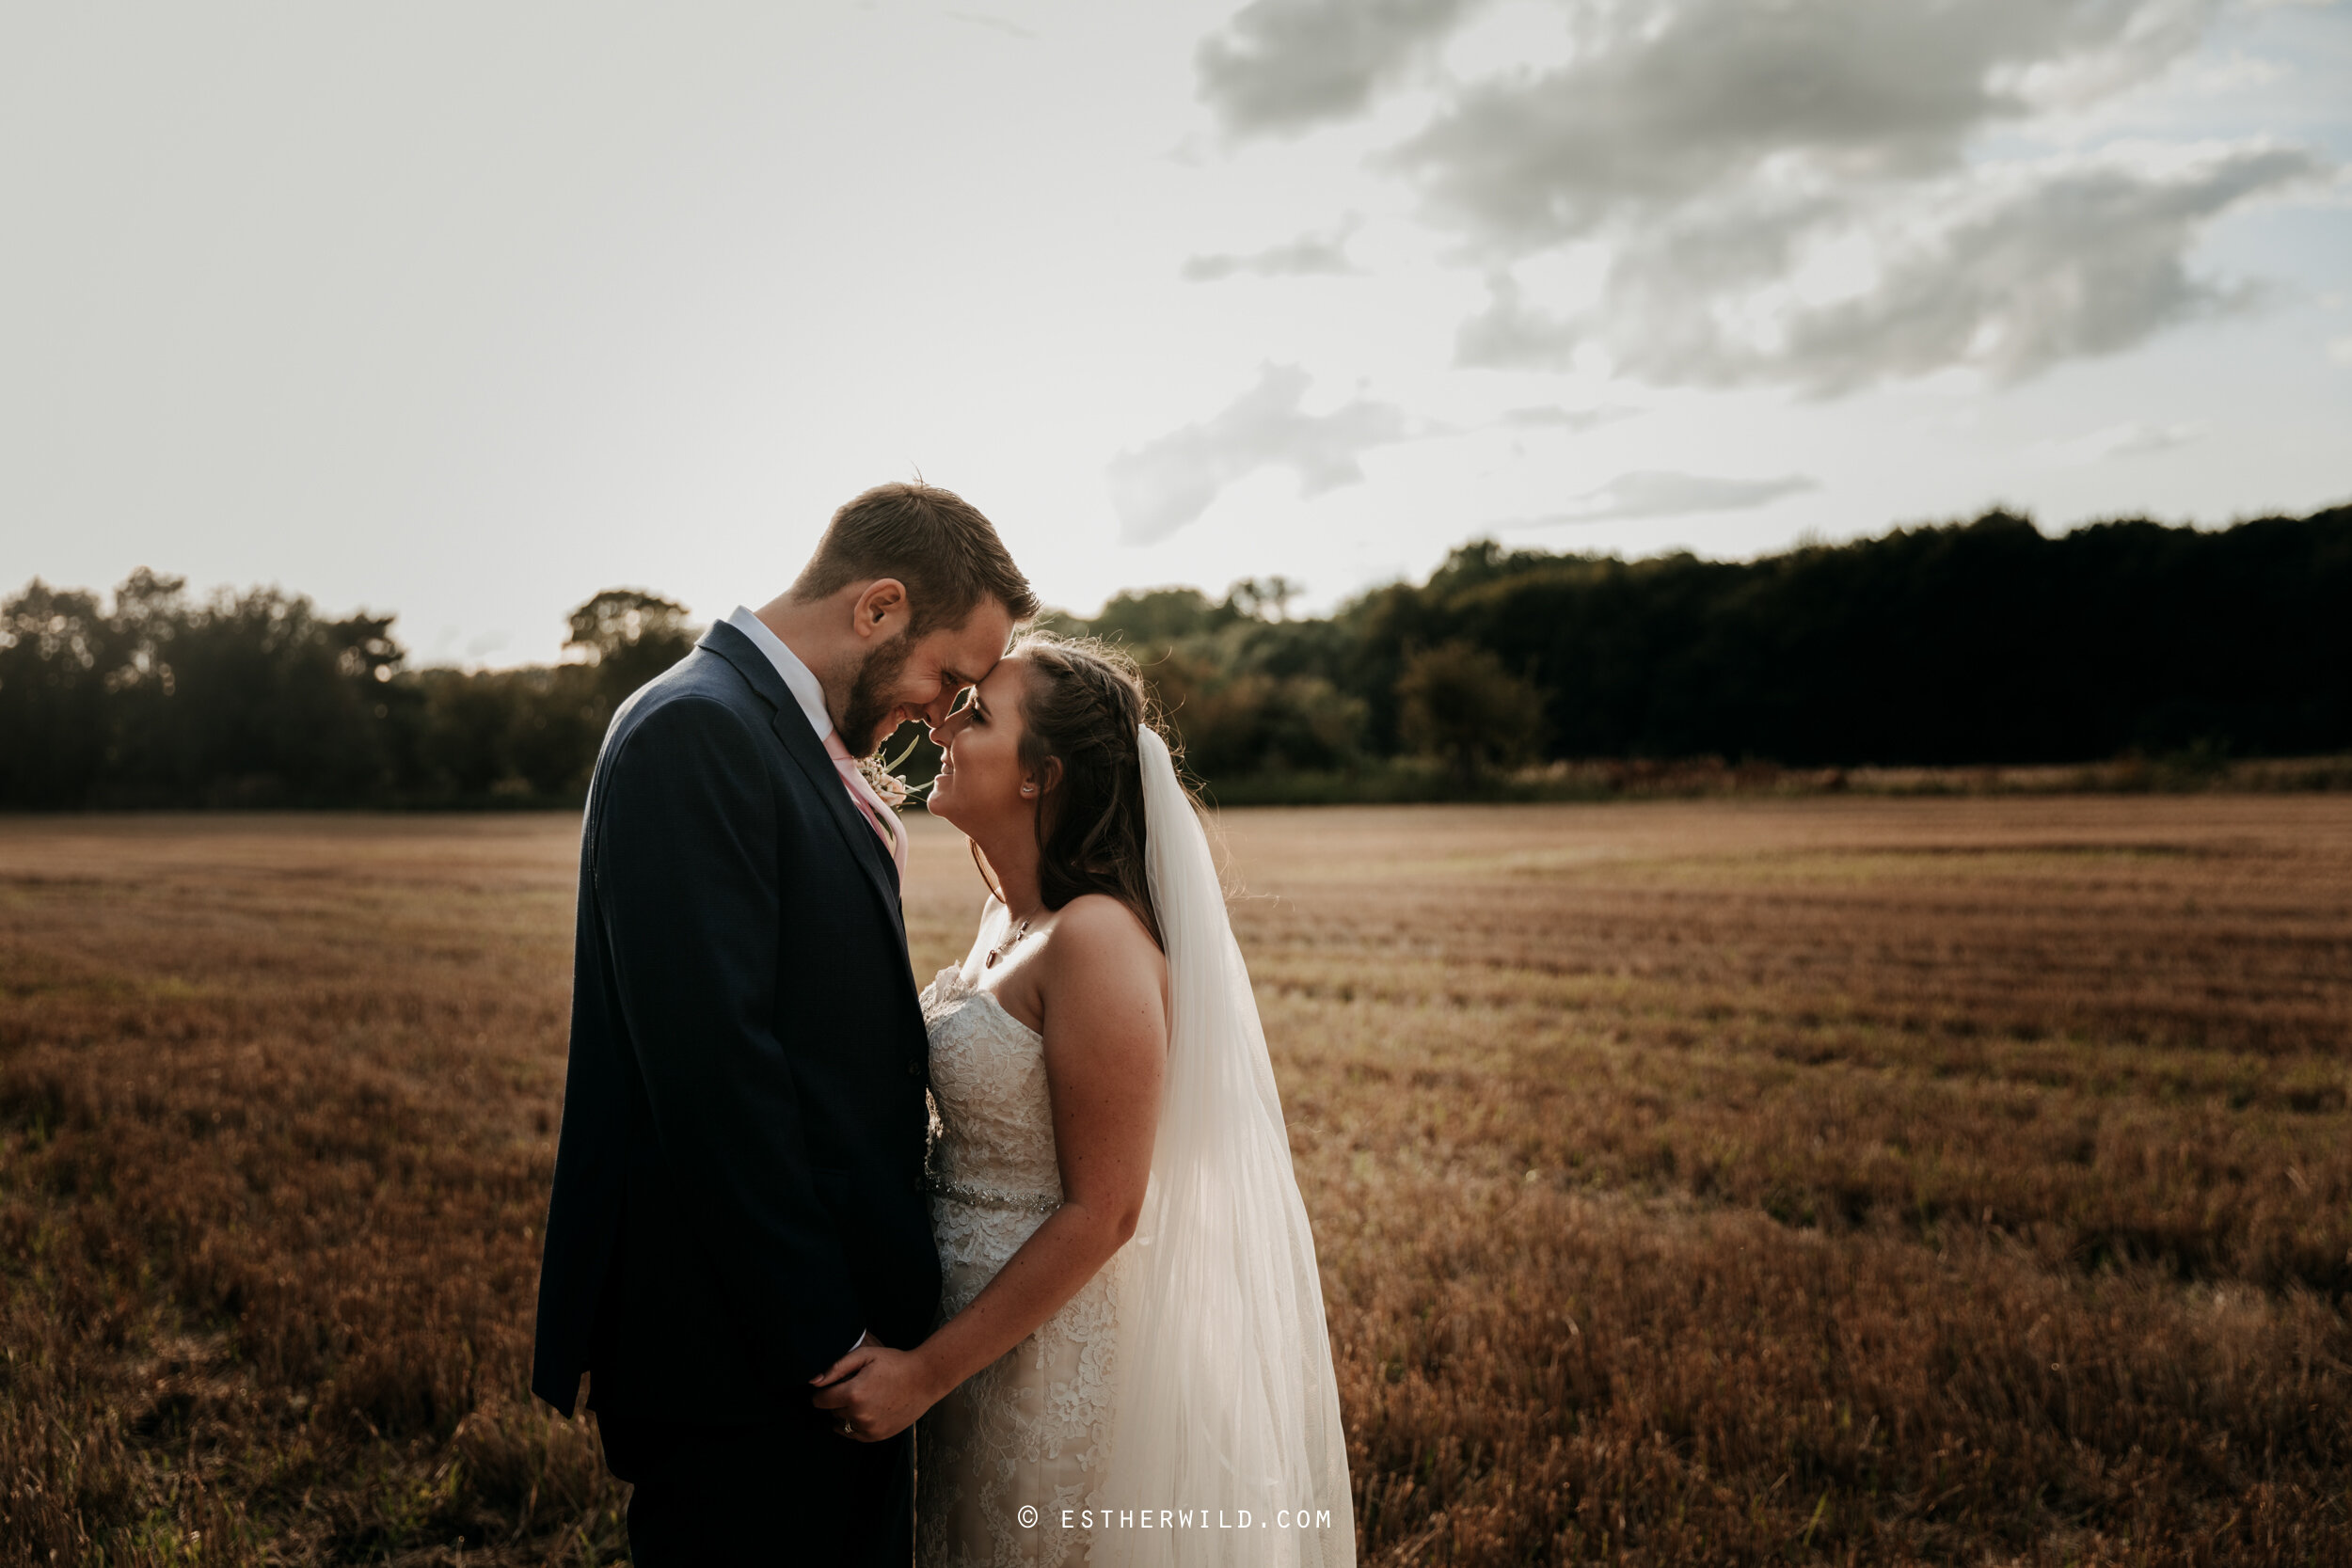  “Esther was part of my dream team, she was recommended by my Maid of honour (also a wedding photographer).   For years I’ve been looking at Esther’s wedding shots and desperately wished that I would have something similar and Esther made that happen